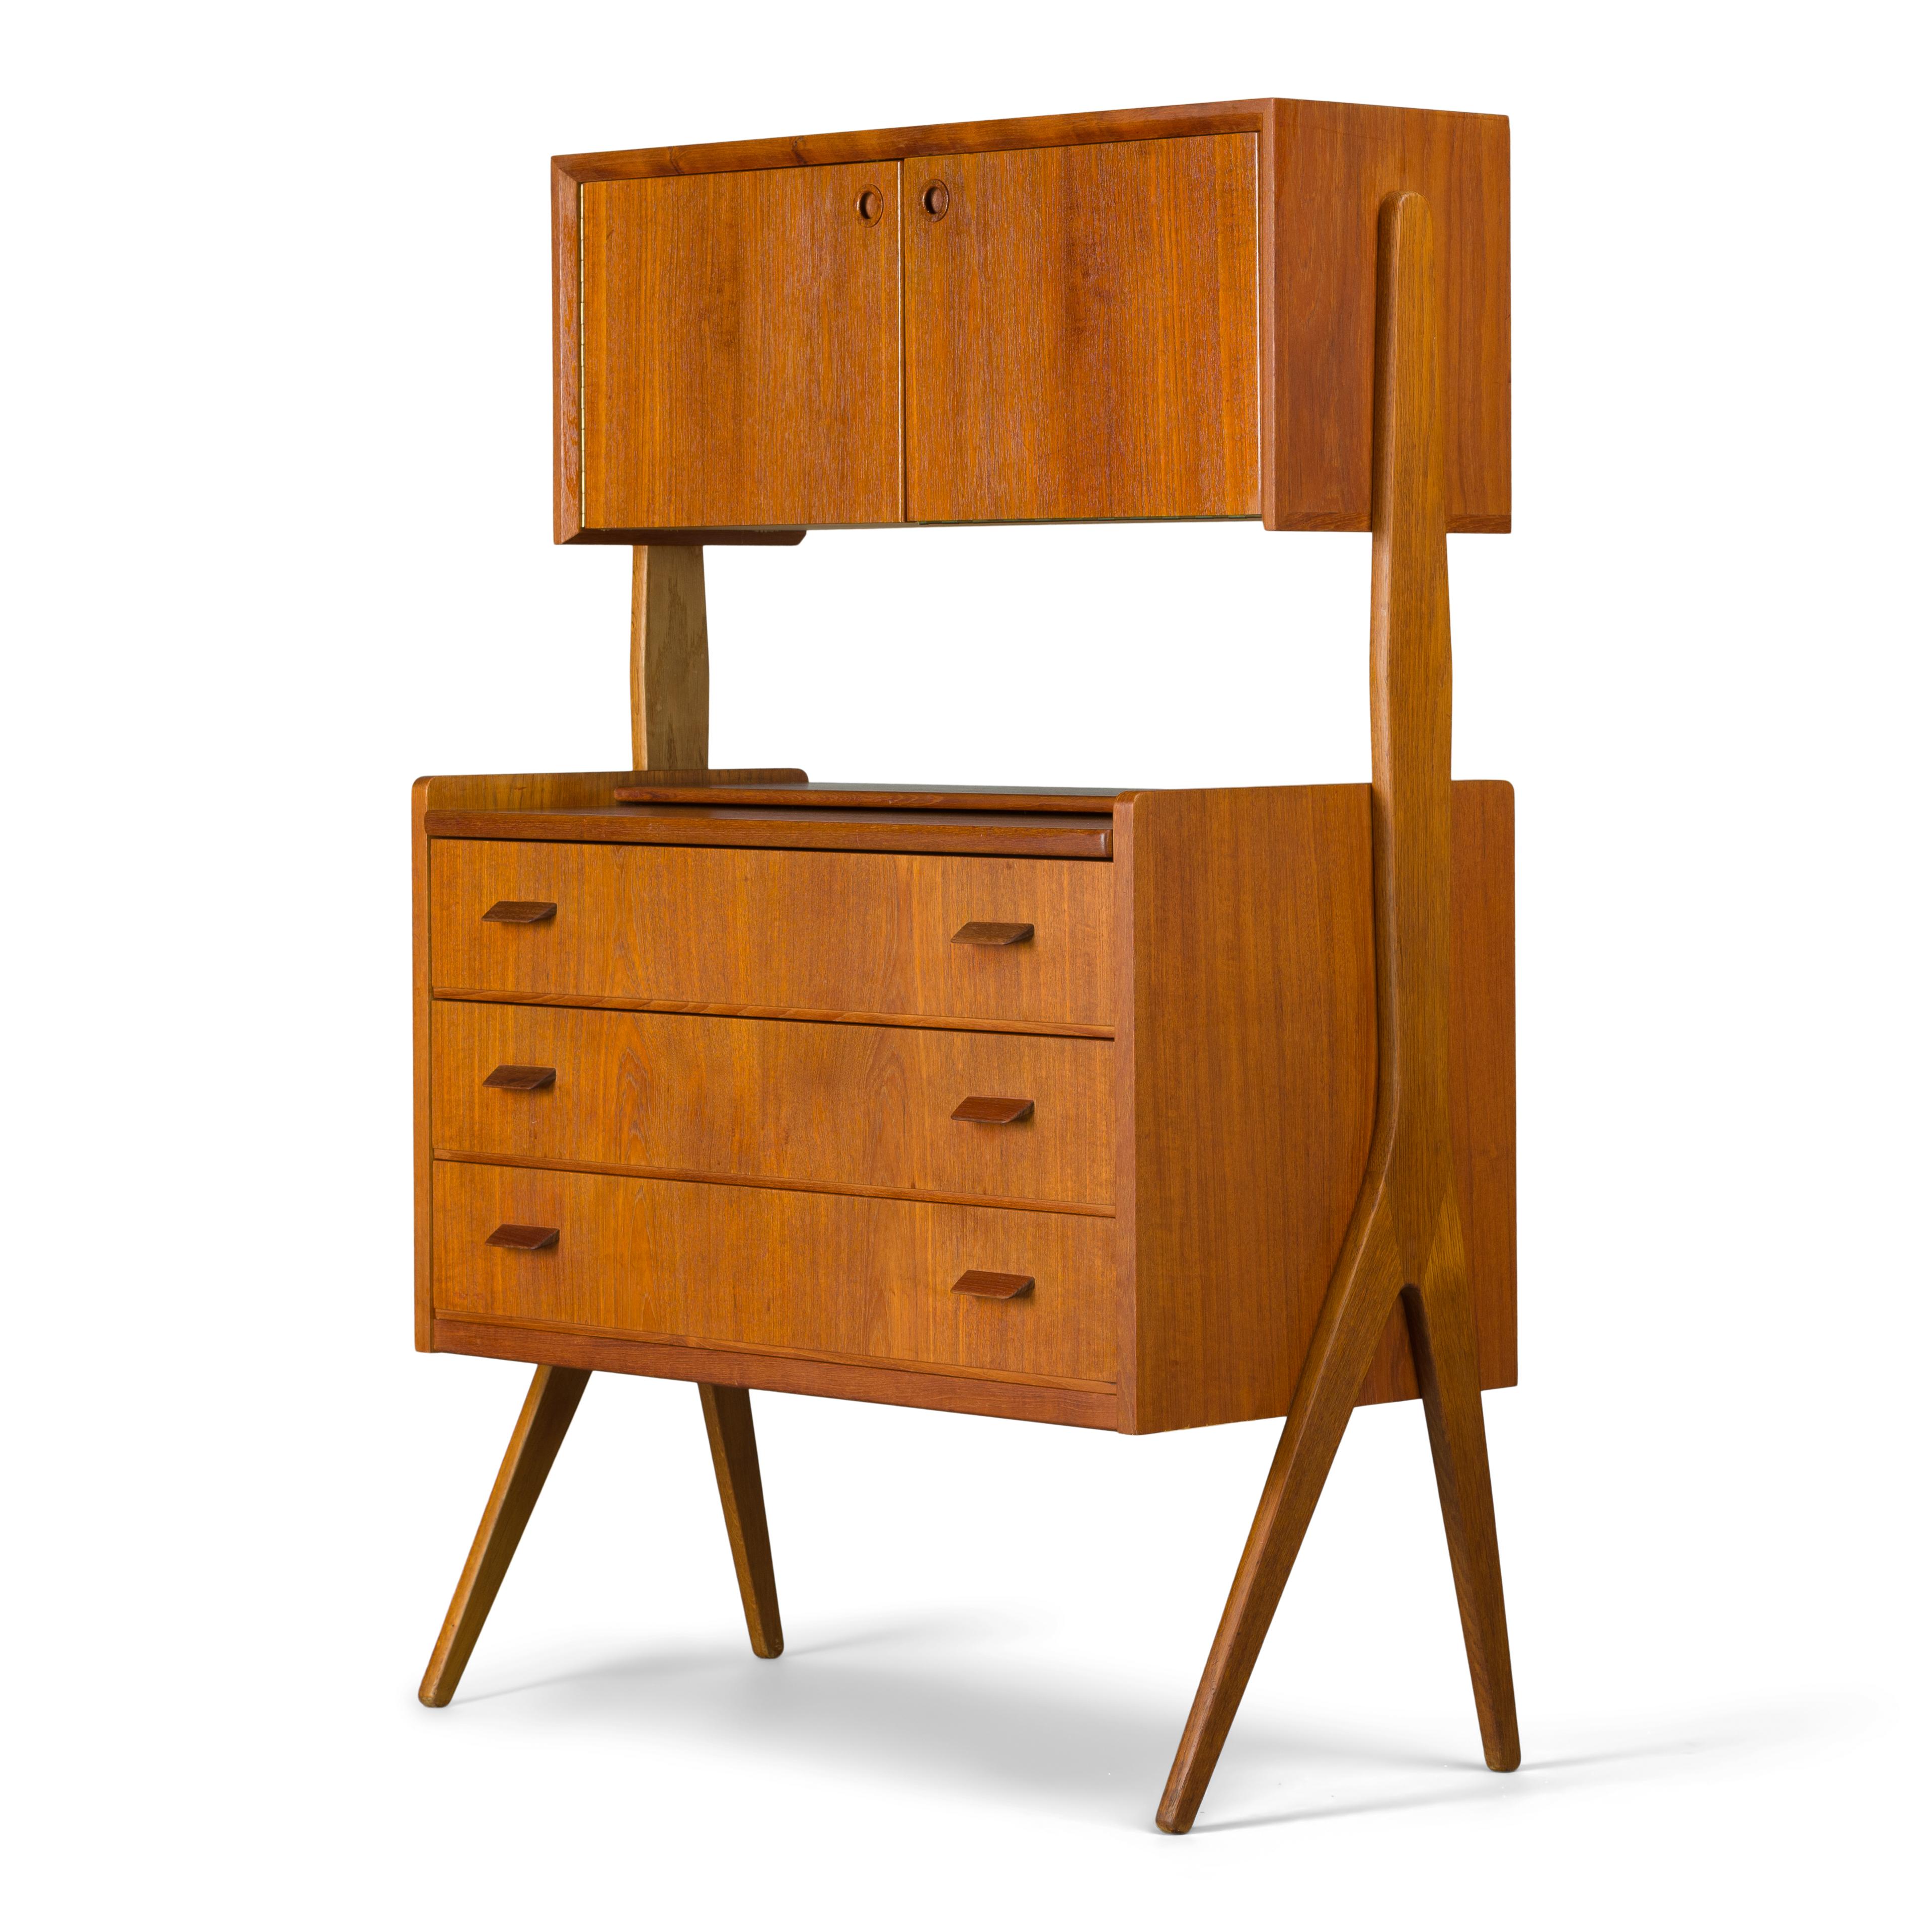 Rare opportunity to swagger your interior with something very groovy sixties style. This multi use dresser/sideboard/vanity/desk is a true two tier attention drawer and has several good bits in its design on top of that! One of those good bits is a